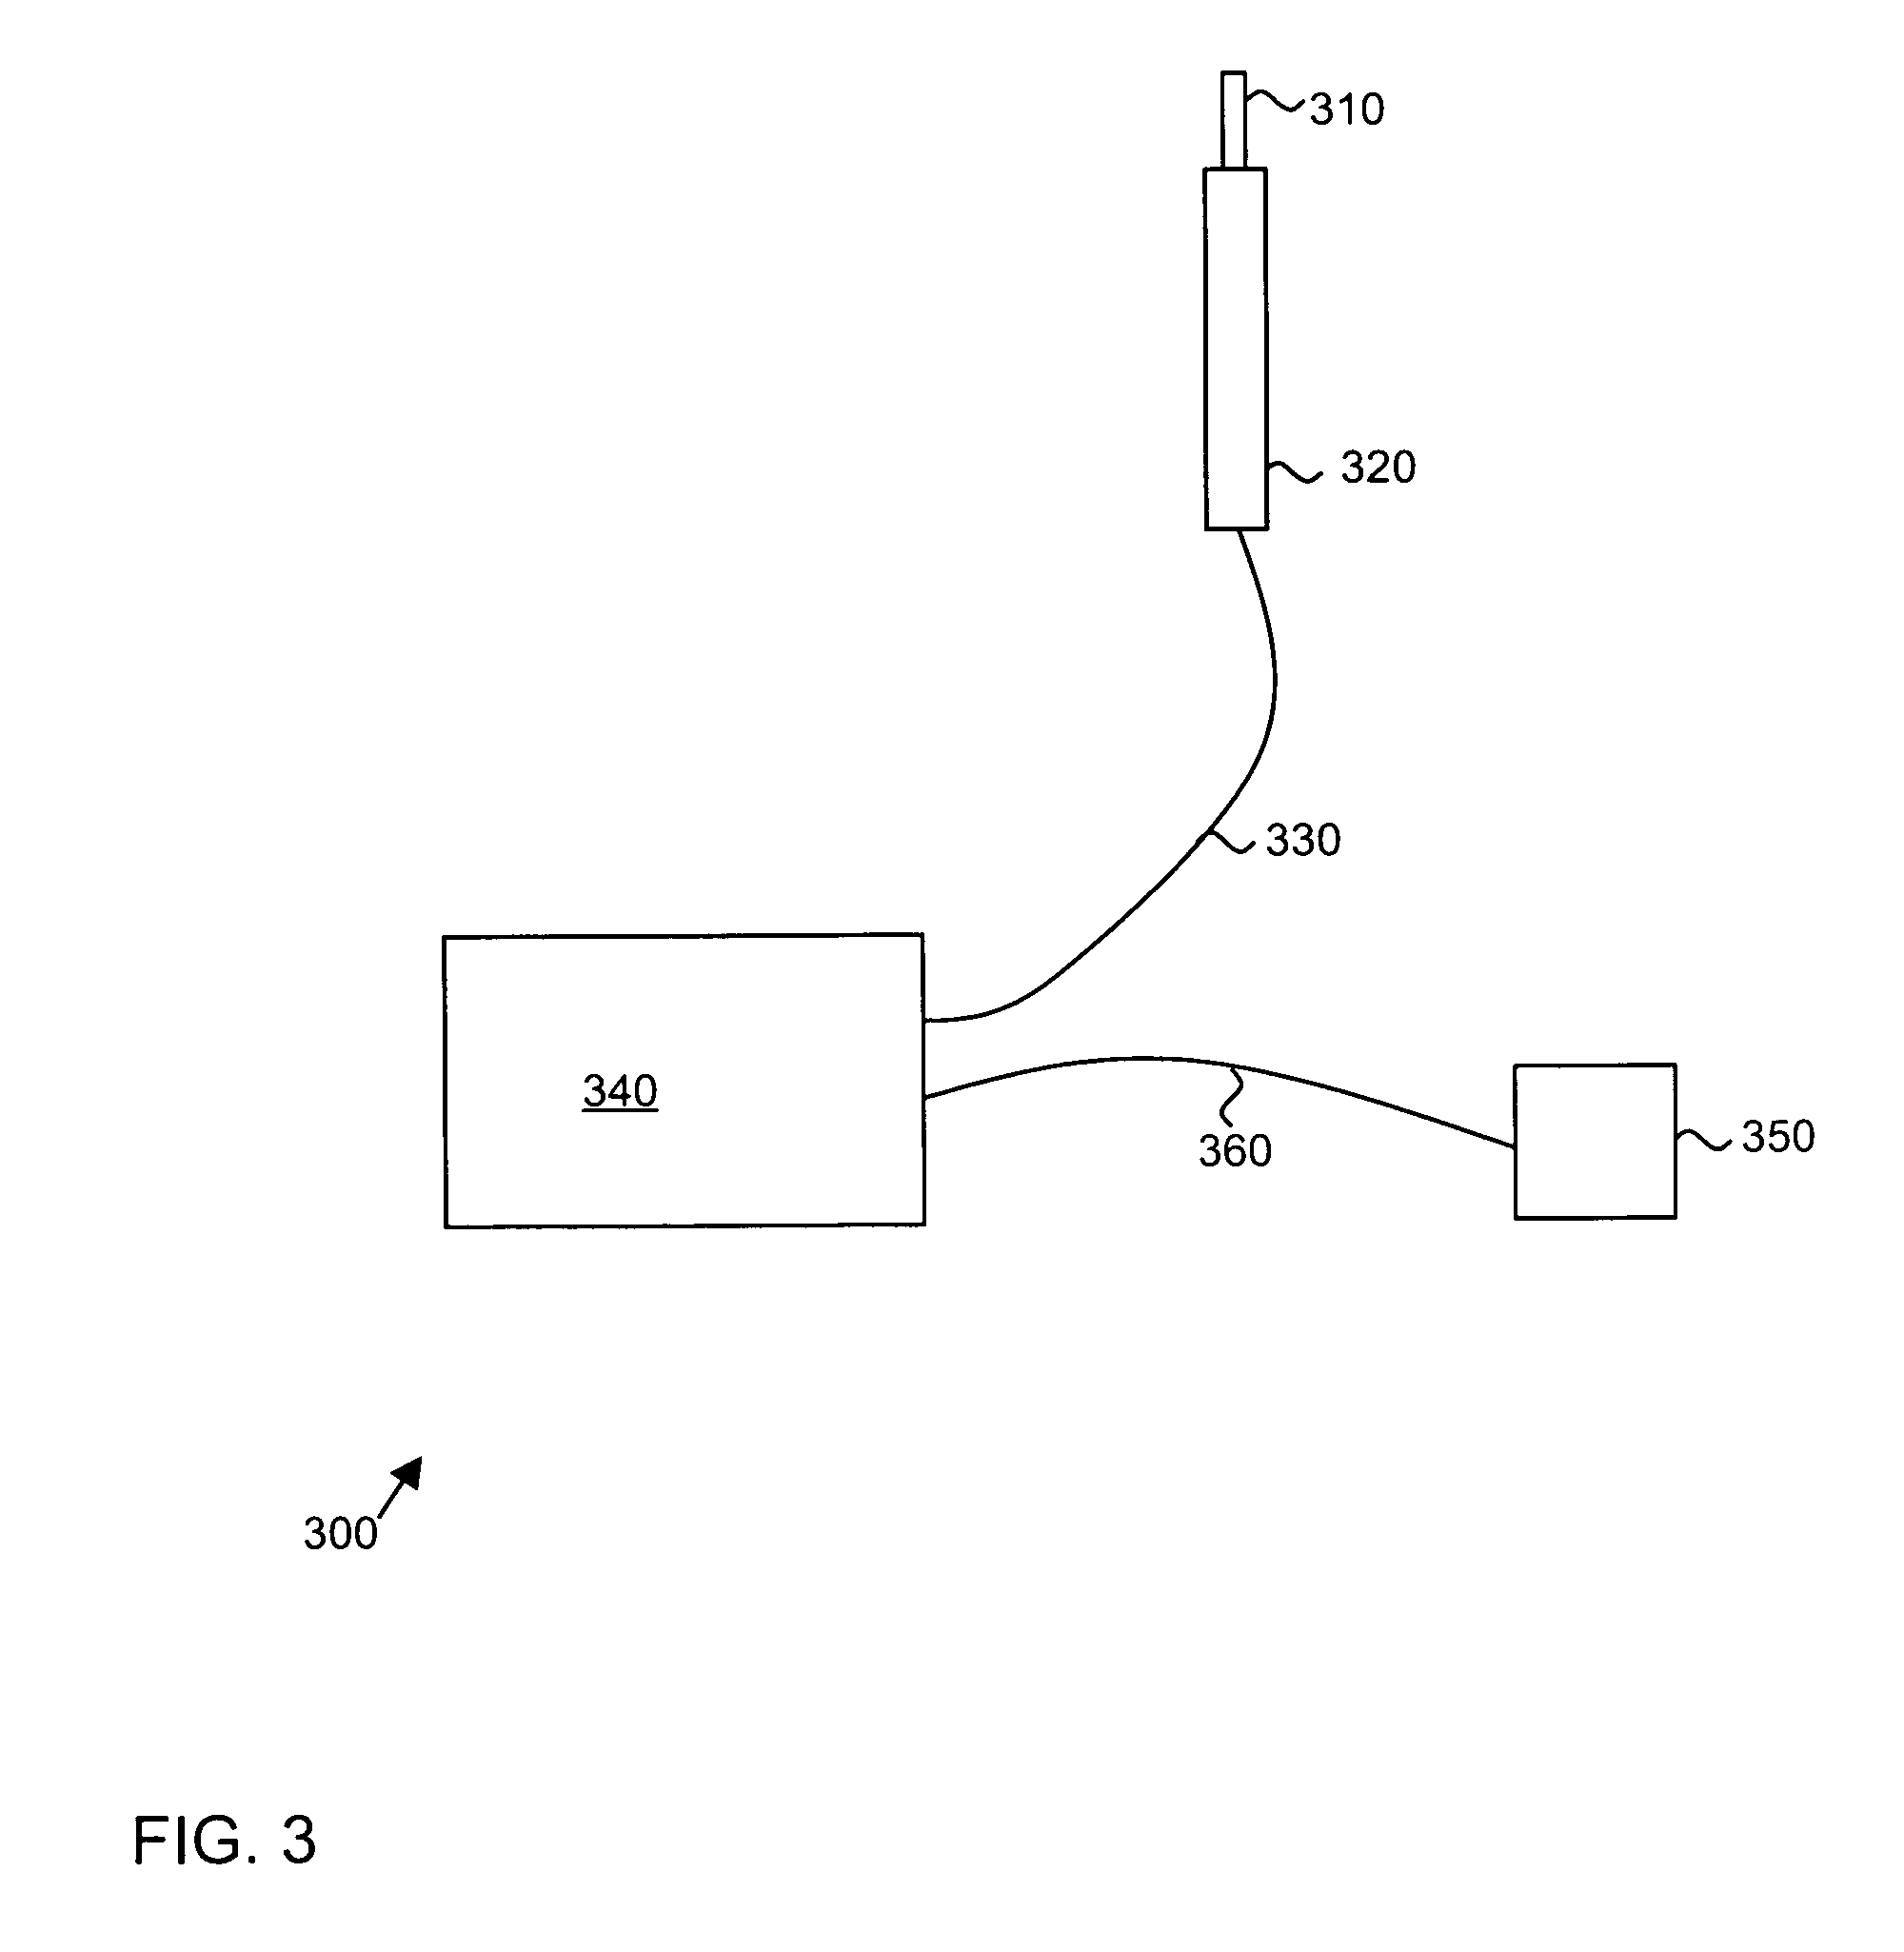 Method and apparatus for avalanche-mediated transfer of agents into cells